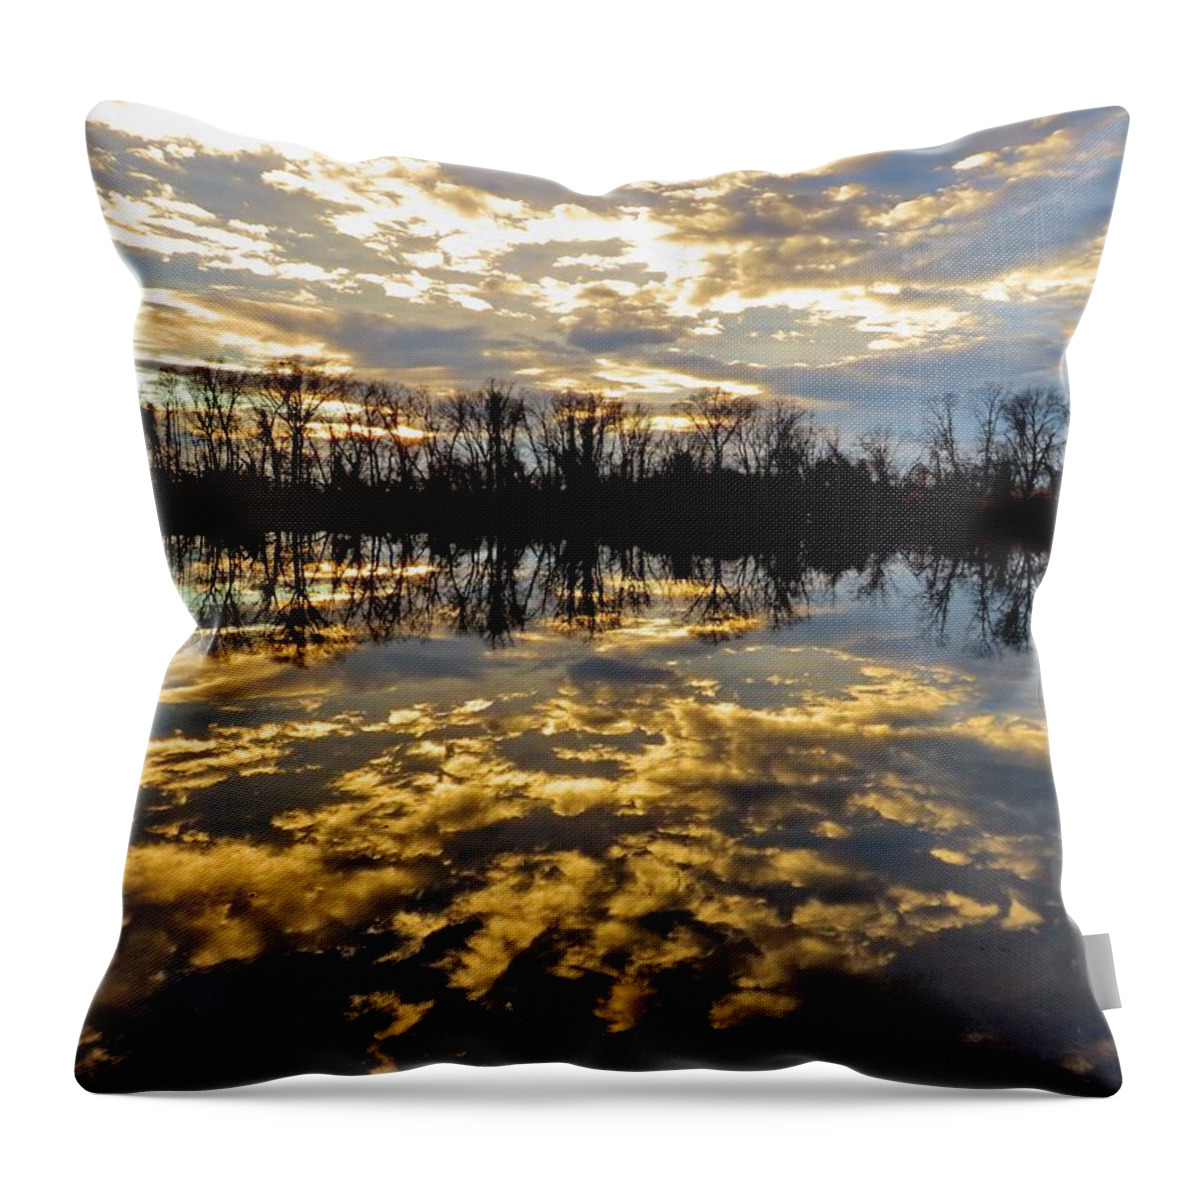 Reflections Throw Pillow featuring the photograph Calm Water Reflections by Linda Stern